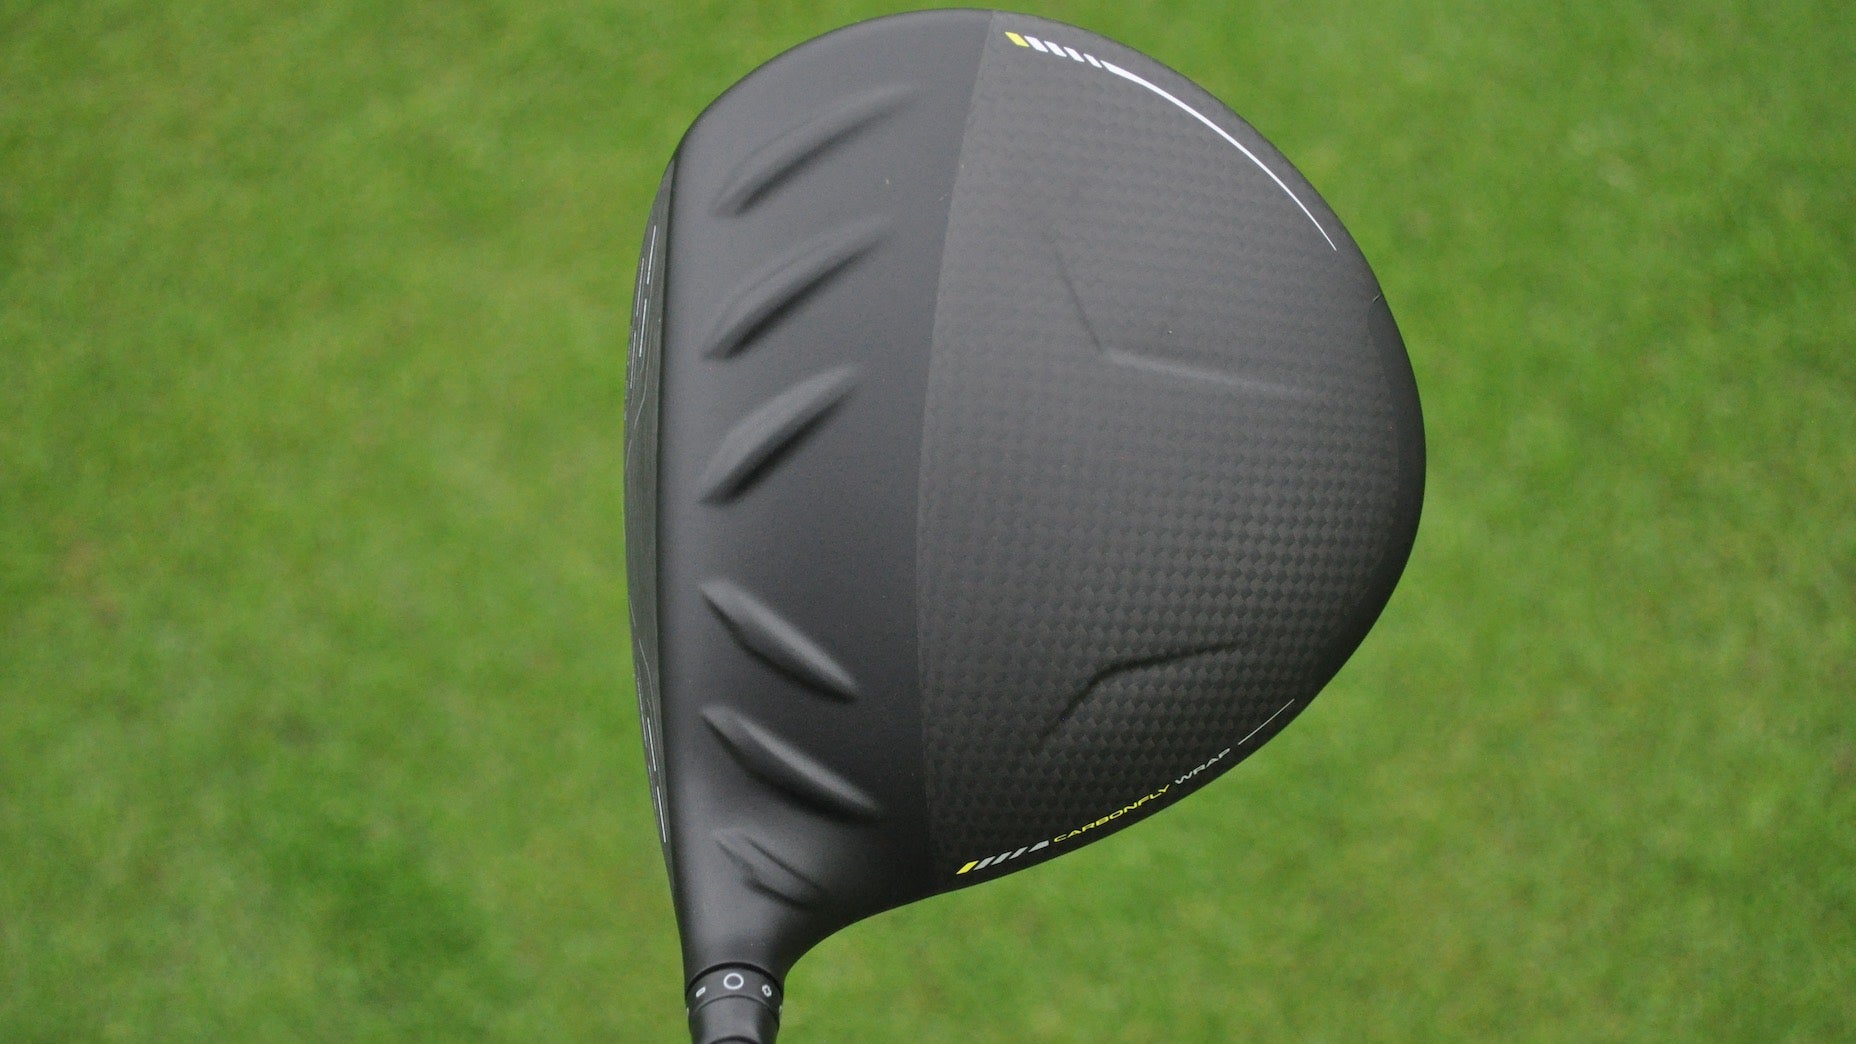 Ping's G430 Max 10K driver shined in 3 areas during robot testing